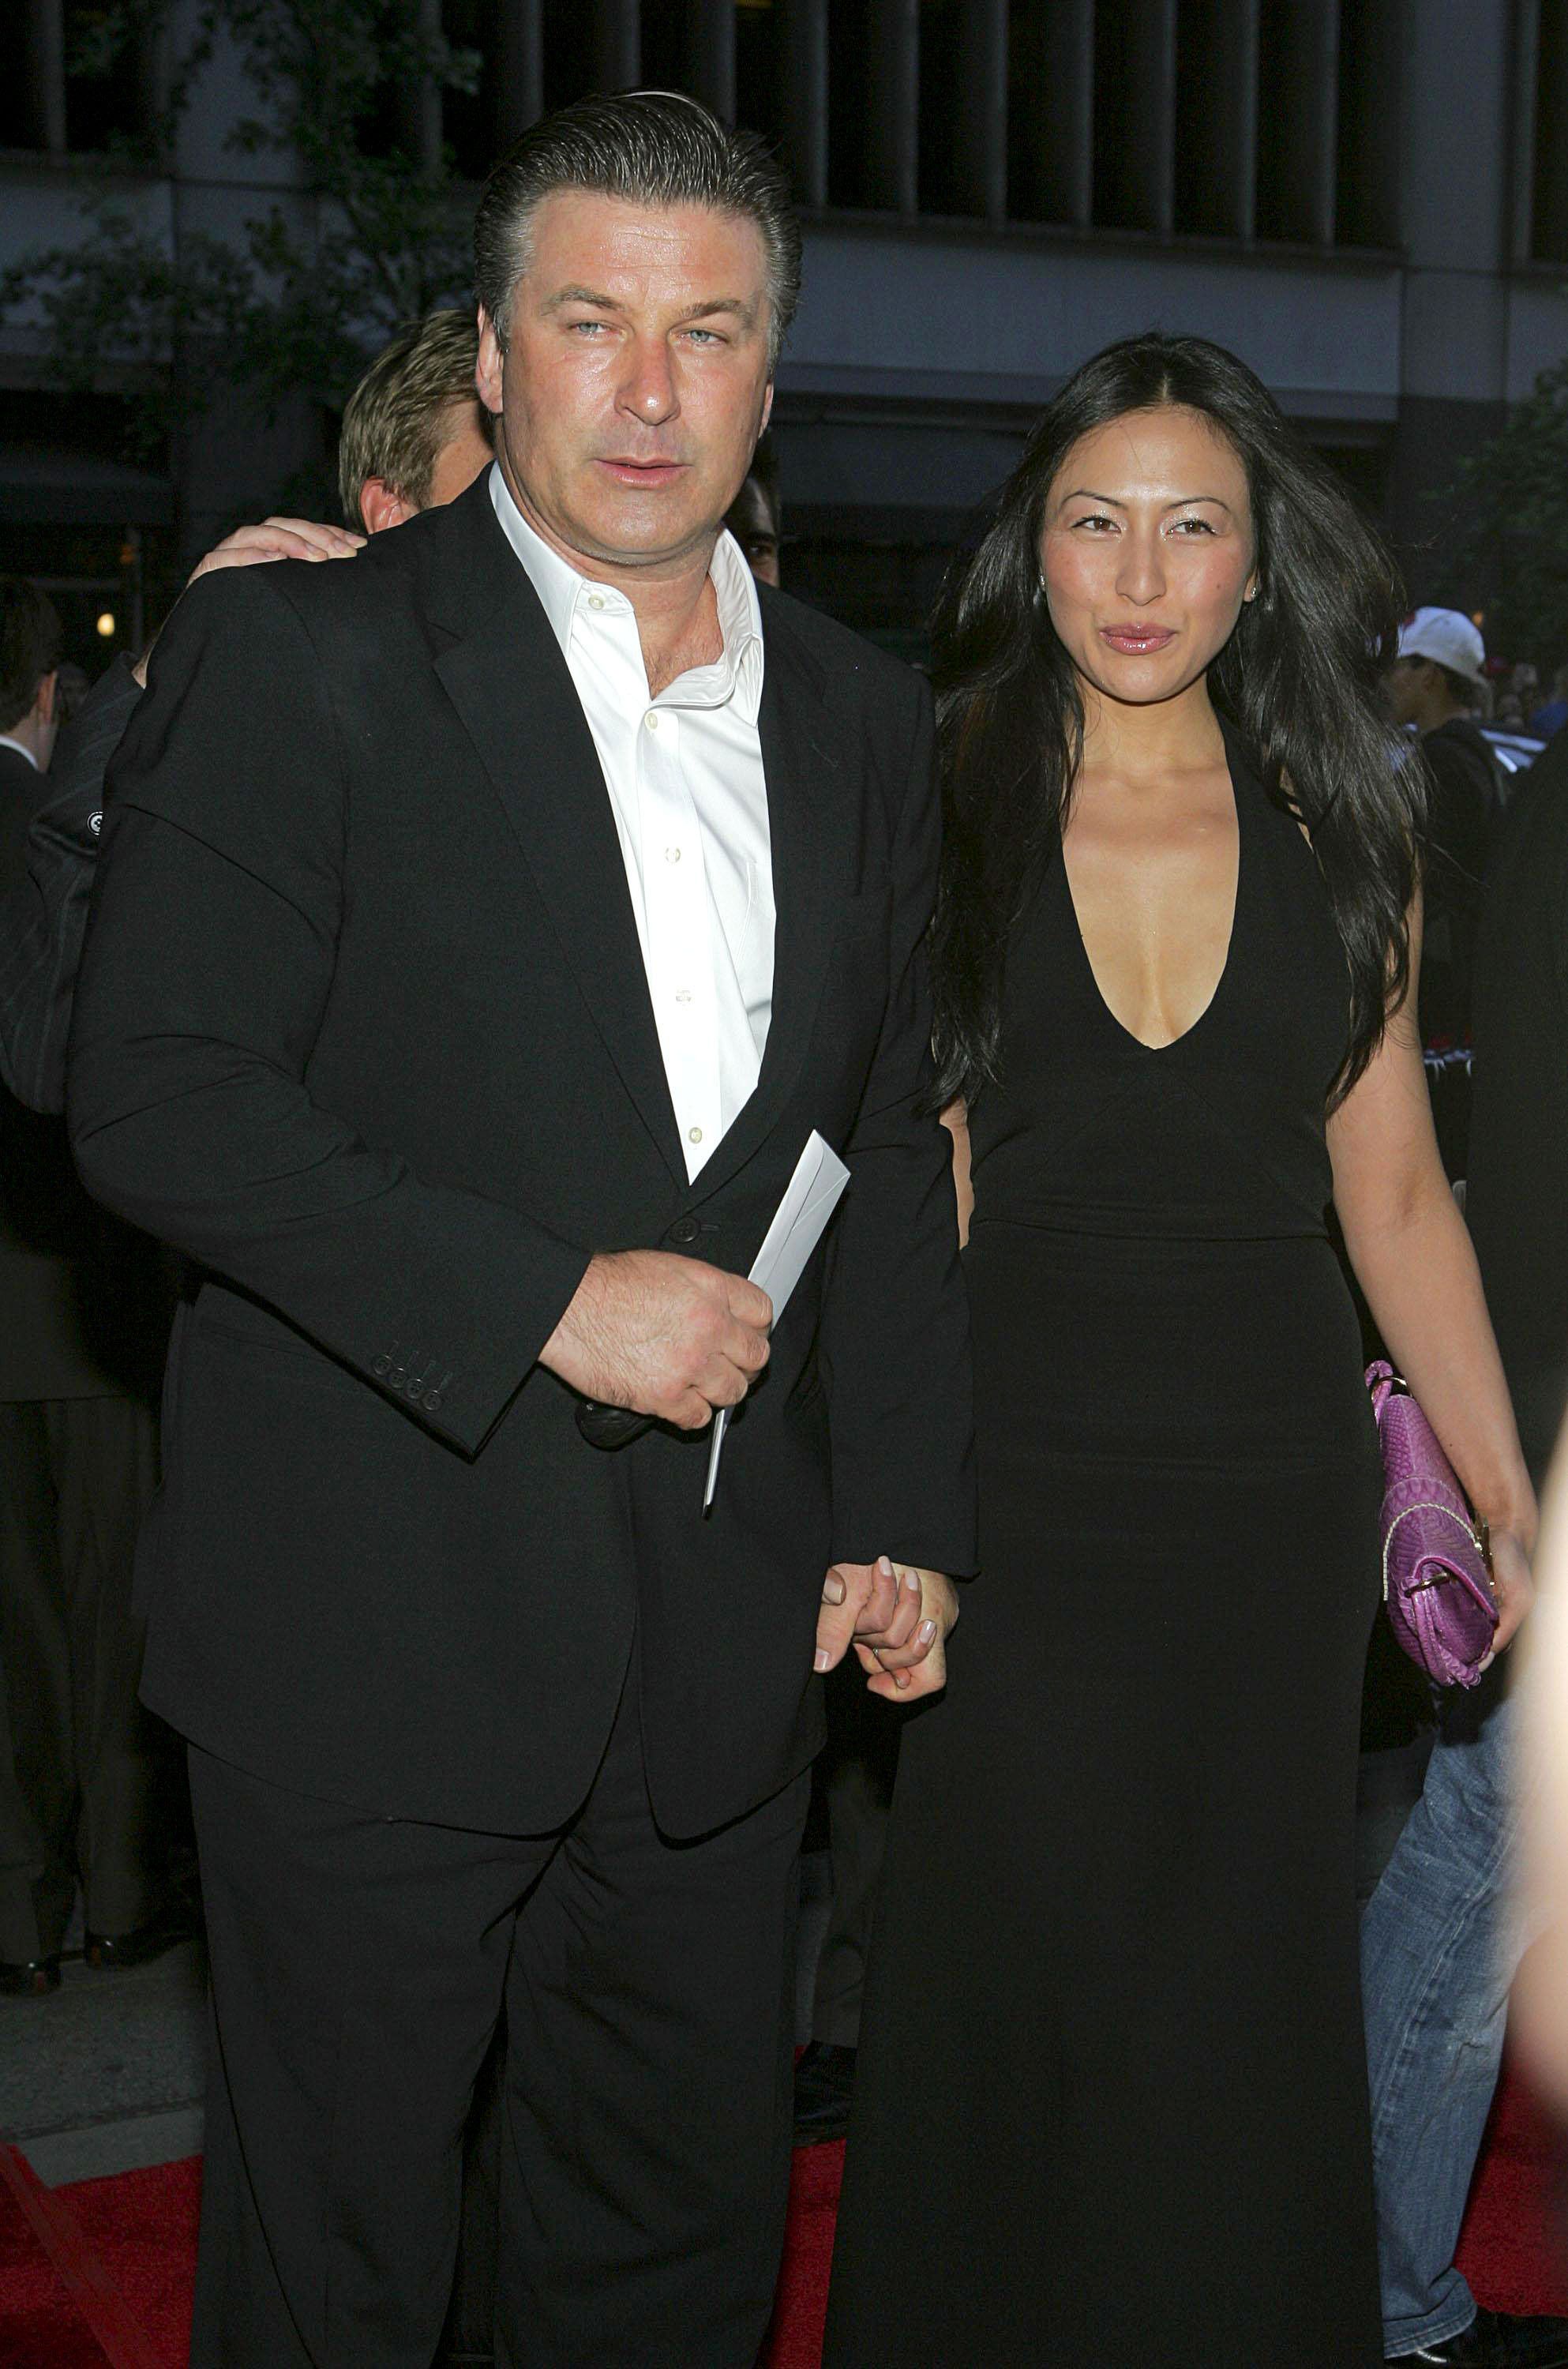 Alec Baldwin and Nicole Seidel at an event.